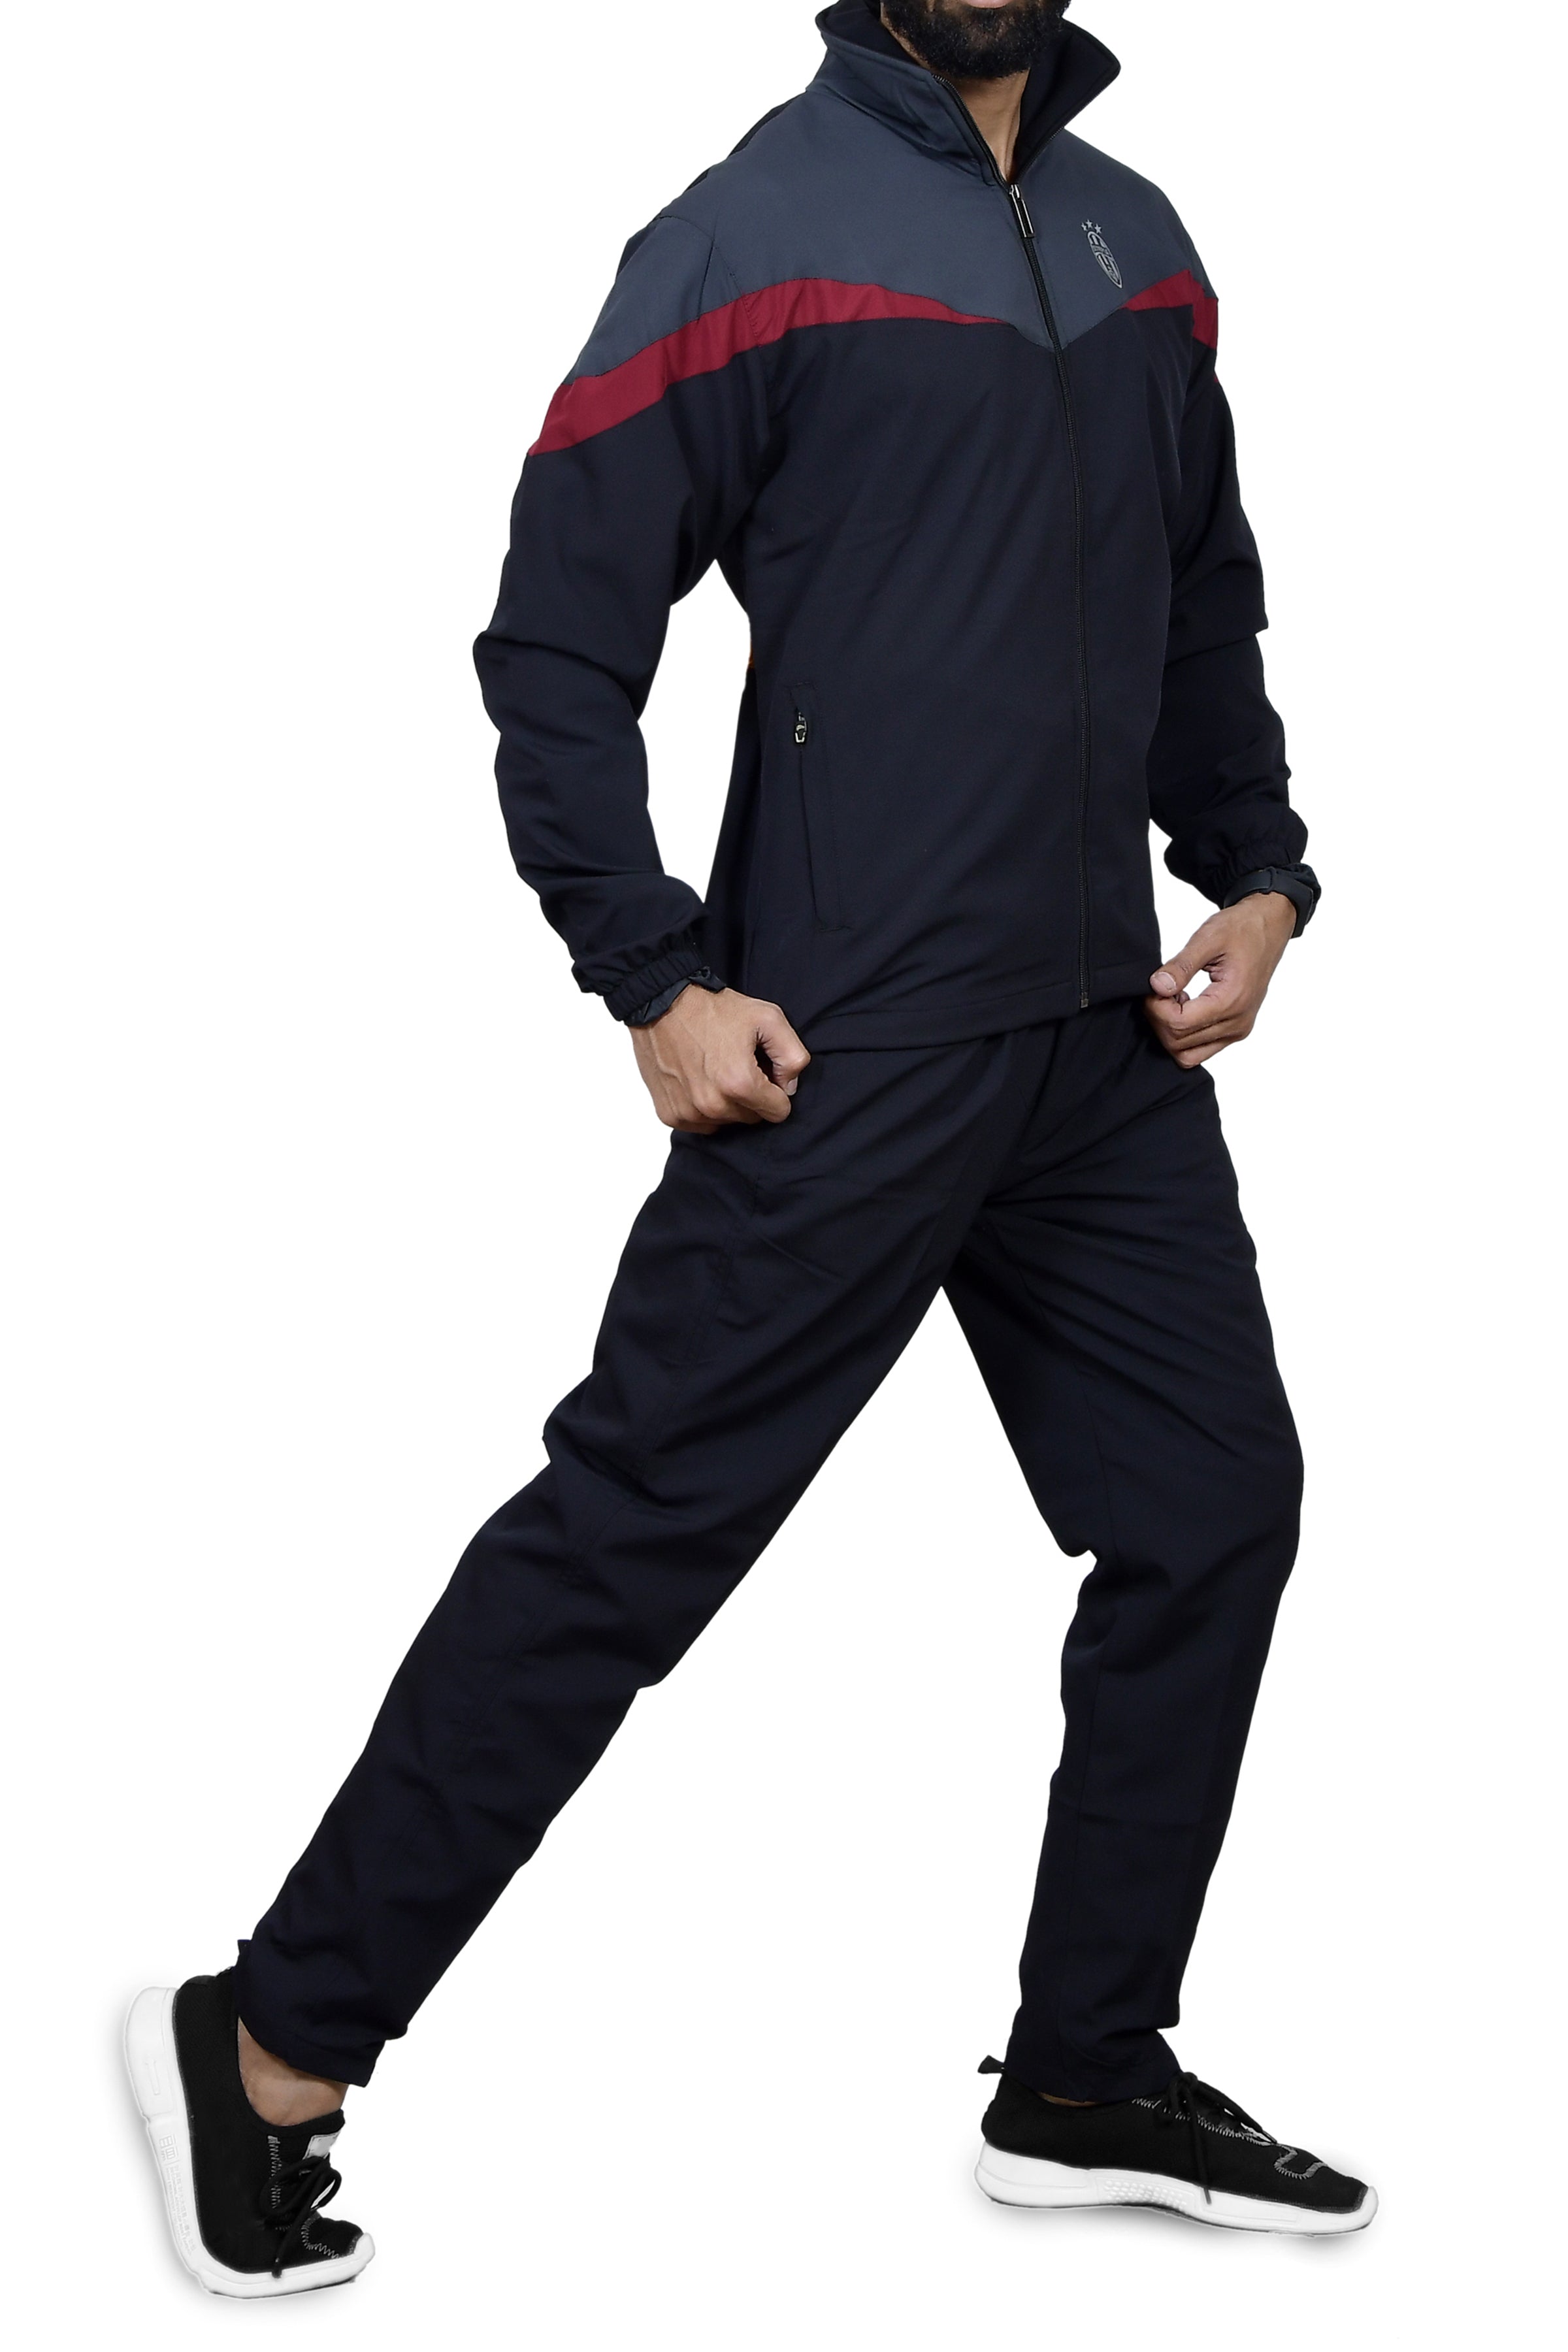 Men's Dry Fit Sports Full Sleeves Zipper Tracksuit for Men - TS-02 - Fitness Outdoor Athletic Gym Running Men's Tracksuit